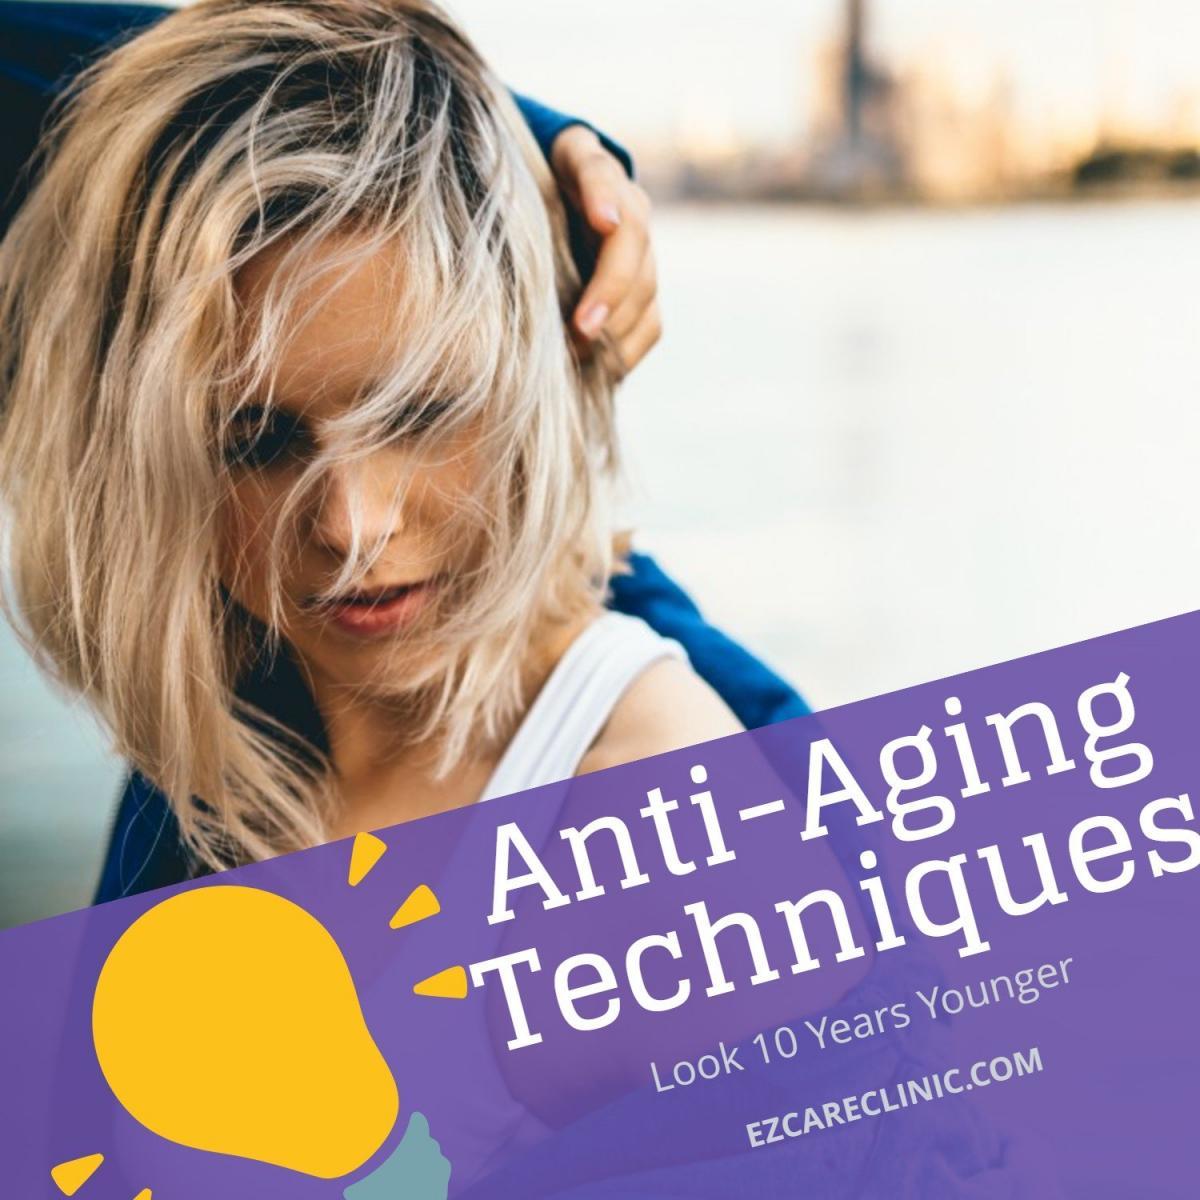 https://ezcareclinic.com/wp-content/uploads/2017/09/Look-10-Years-Younger-Anti-Aging-Techniques.jpg